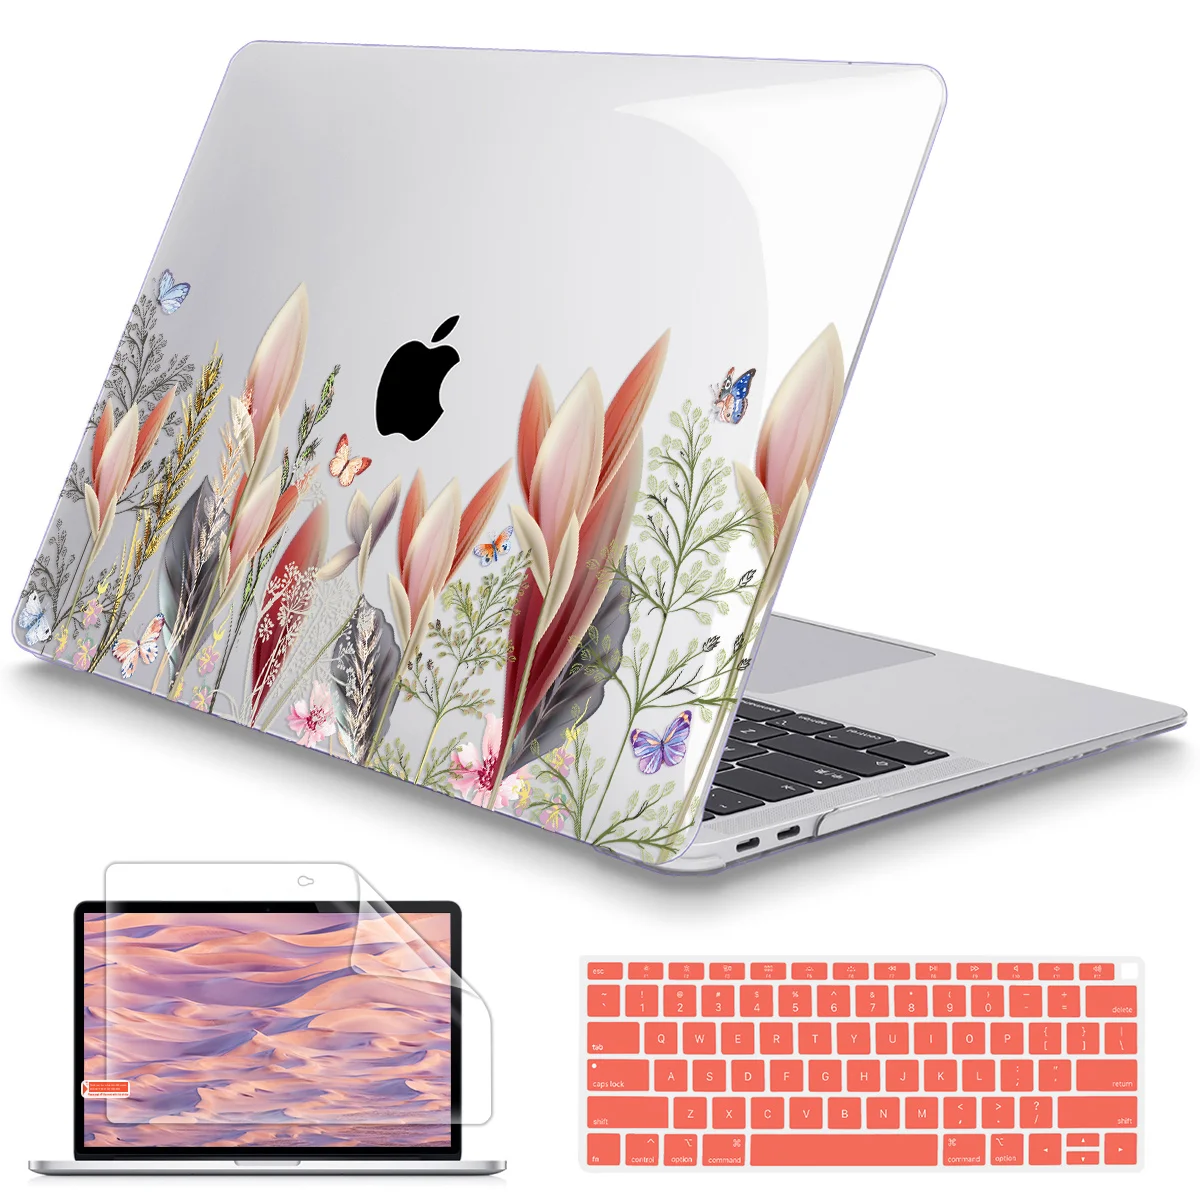 Floral Plastic Hard Case For MacBook Air Pro Retina 11 12 13 15 16inch 2020 M1 A2337 A2179 A2338 Keyboard Cover Screen Protector